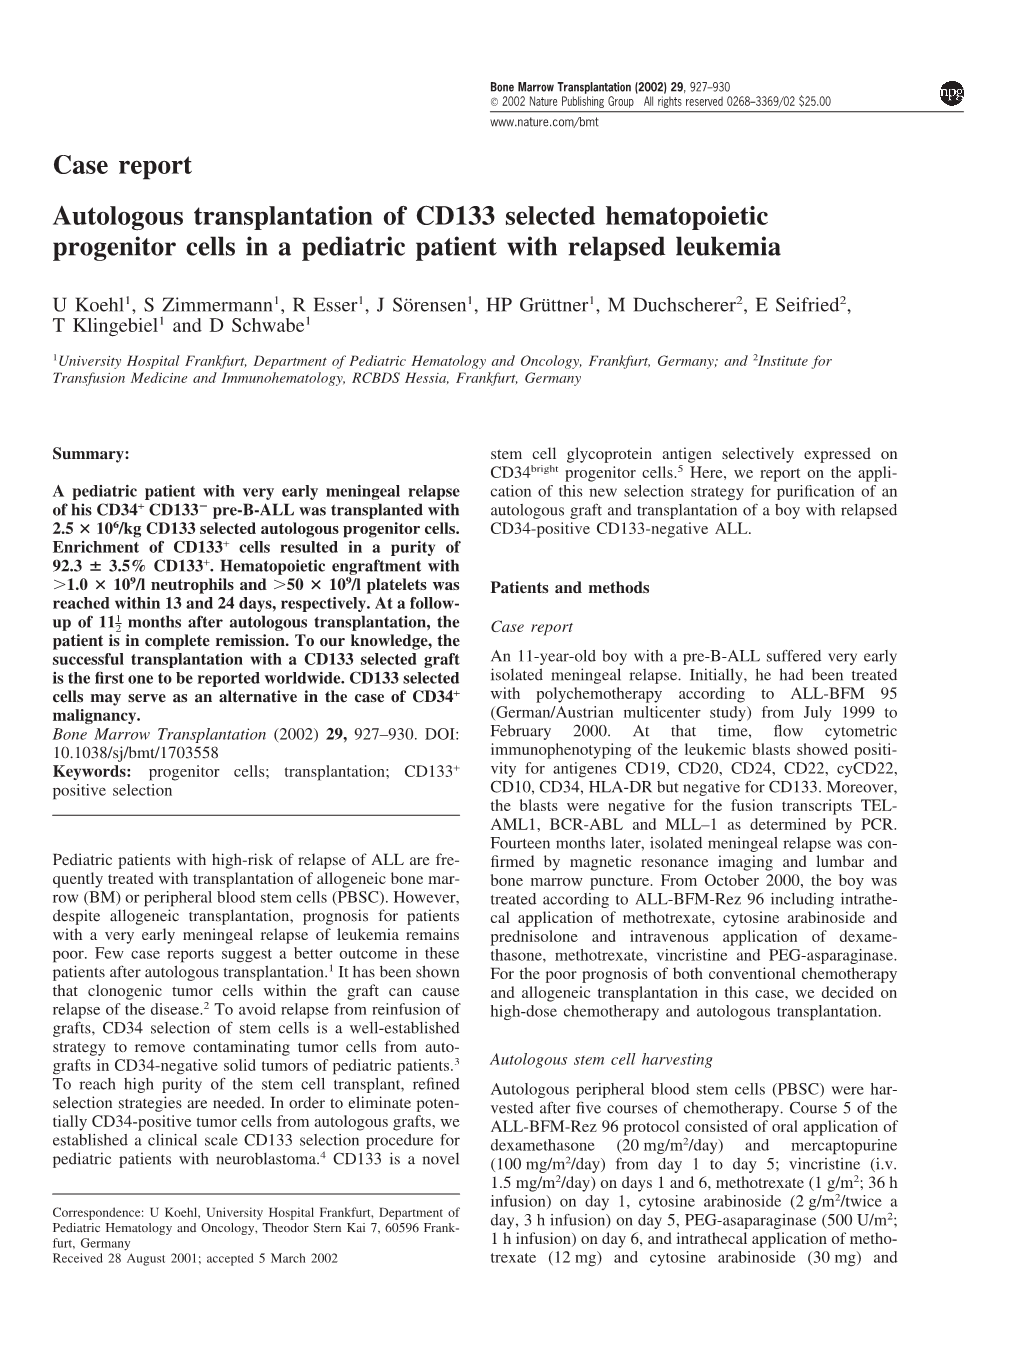 Case Report Autologous Transplantation of CD133 Selected Hematopoietic Progenitor Cells in a Pediatric Patient with Relapsed Leukemia